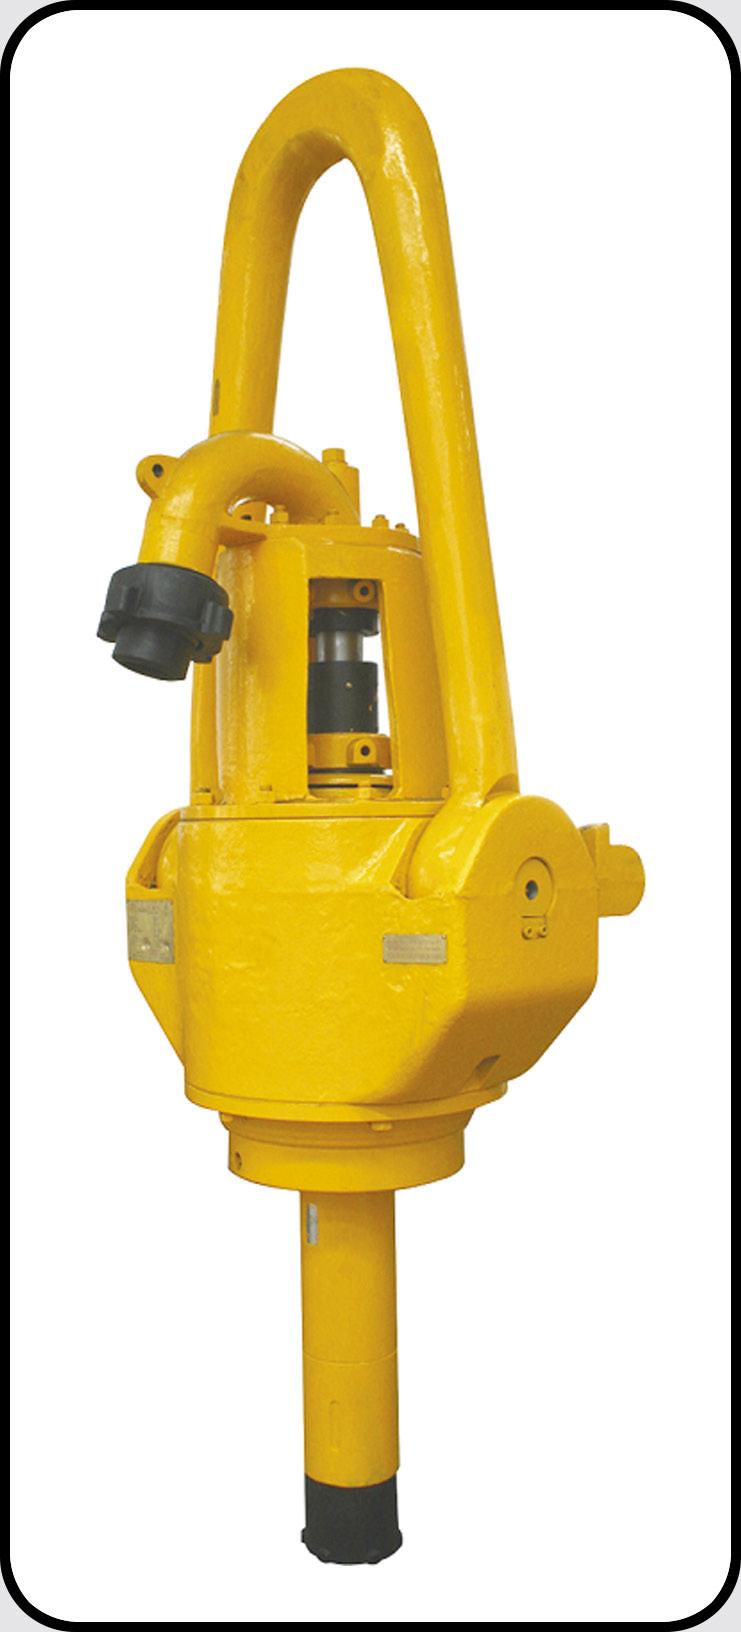 ROTARY SWIVEL DESIGN FEATURES. Equipped with standard bails. The washpipe and packing assembly are cartridge type and can be replaced without disconnecting the rotary hose and/or gooseneck.